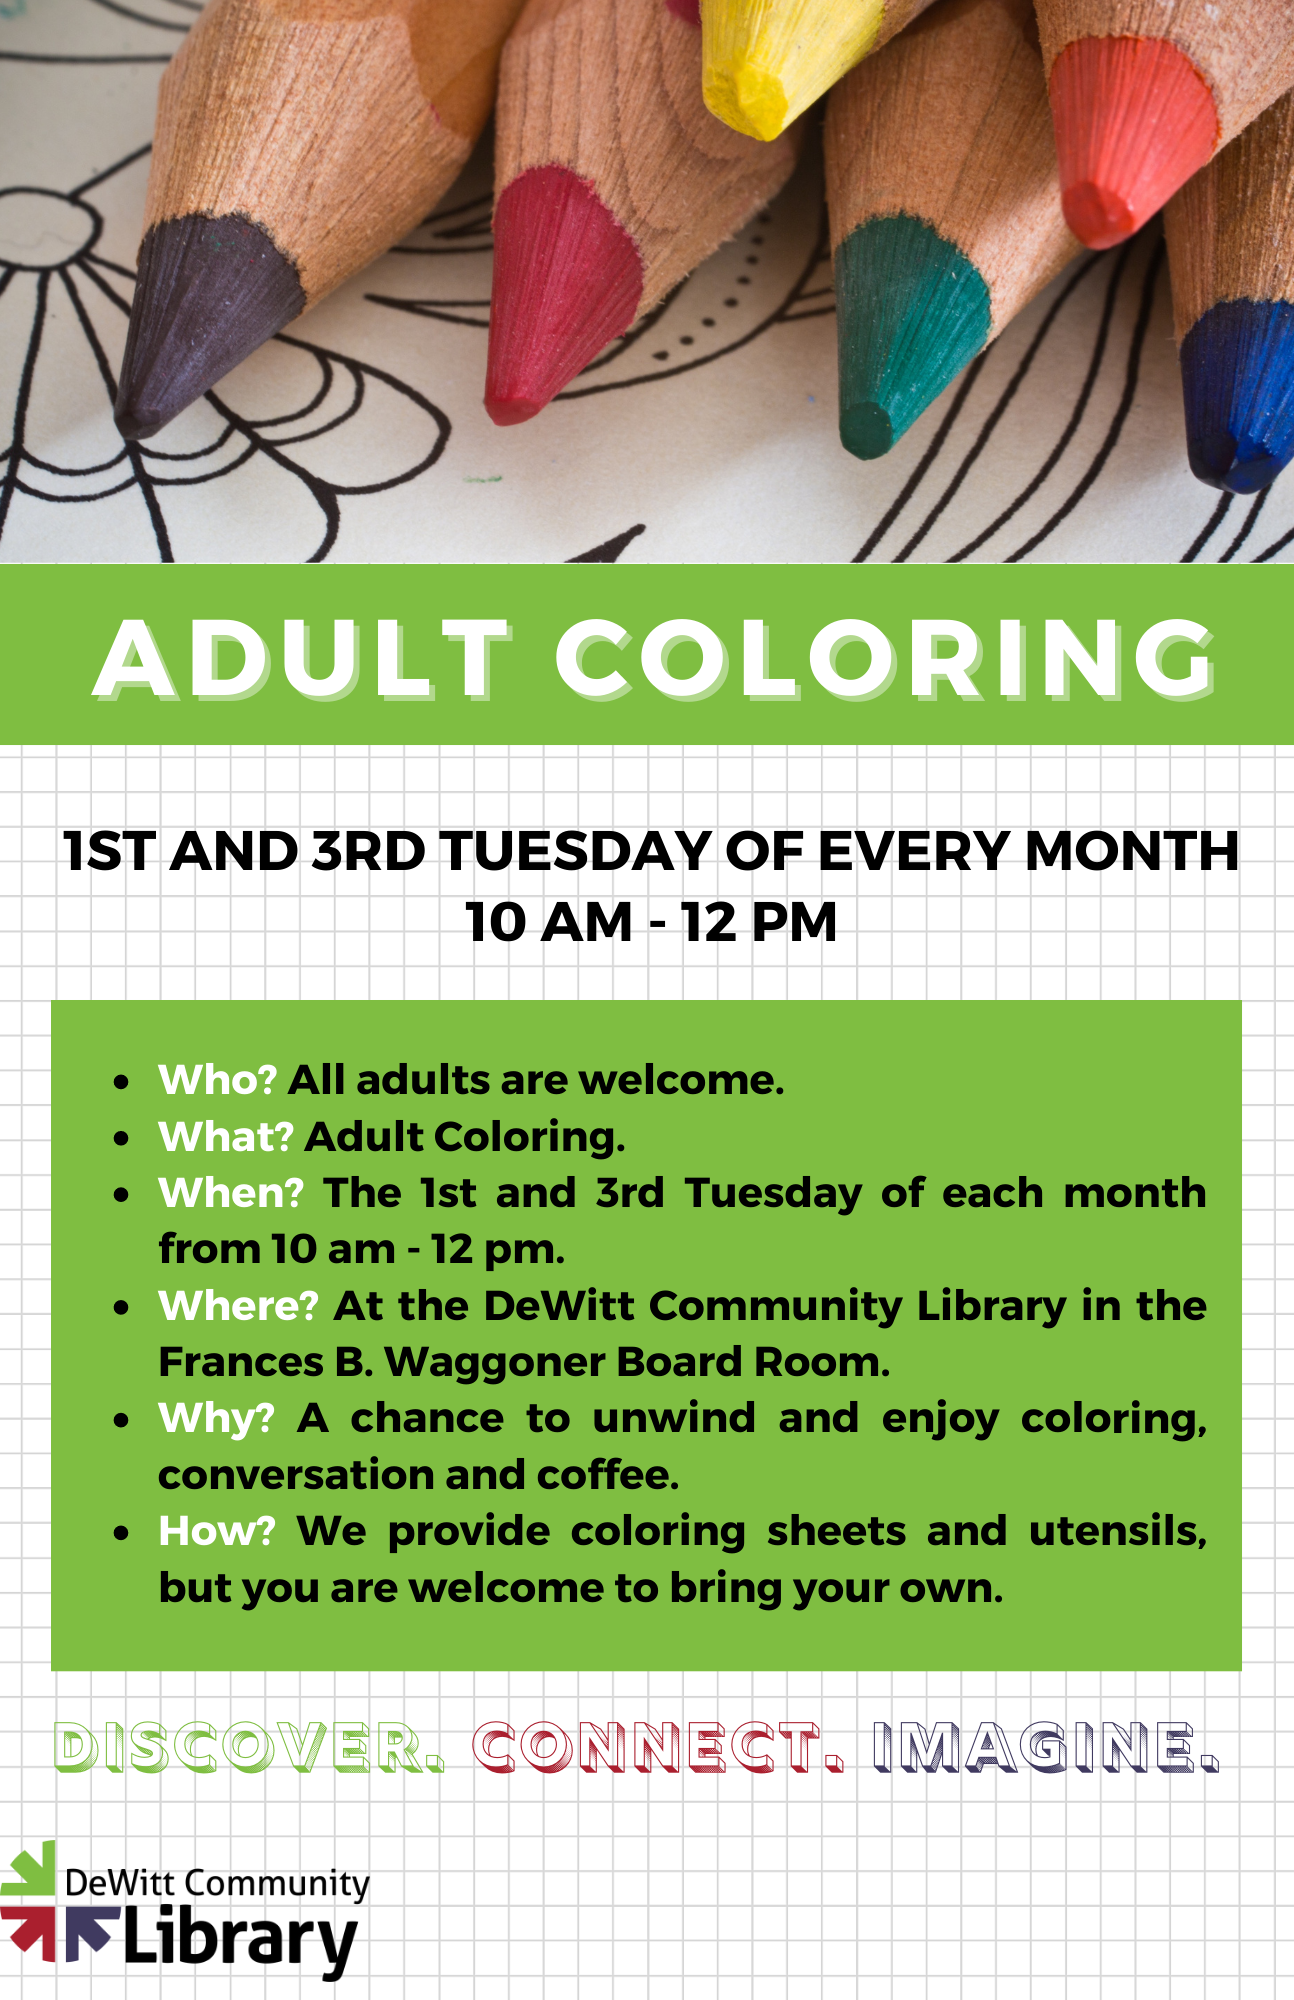 Smaller Adult Coloring sign.png